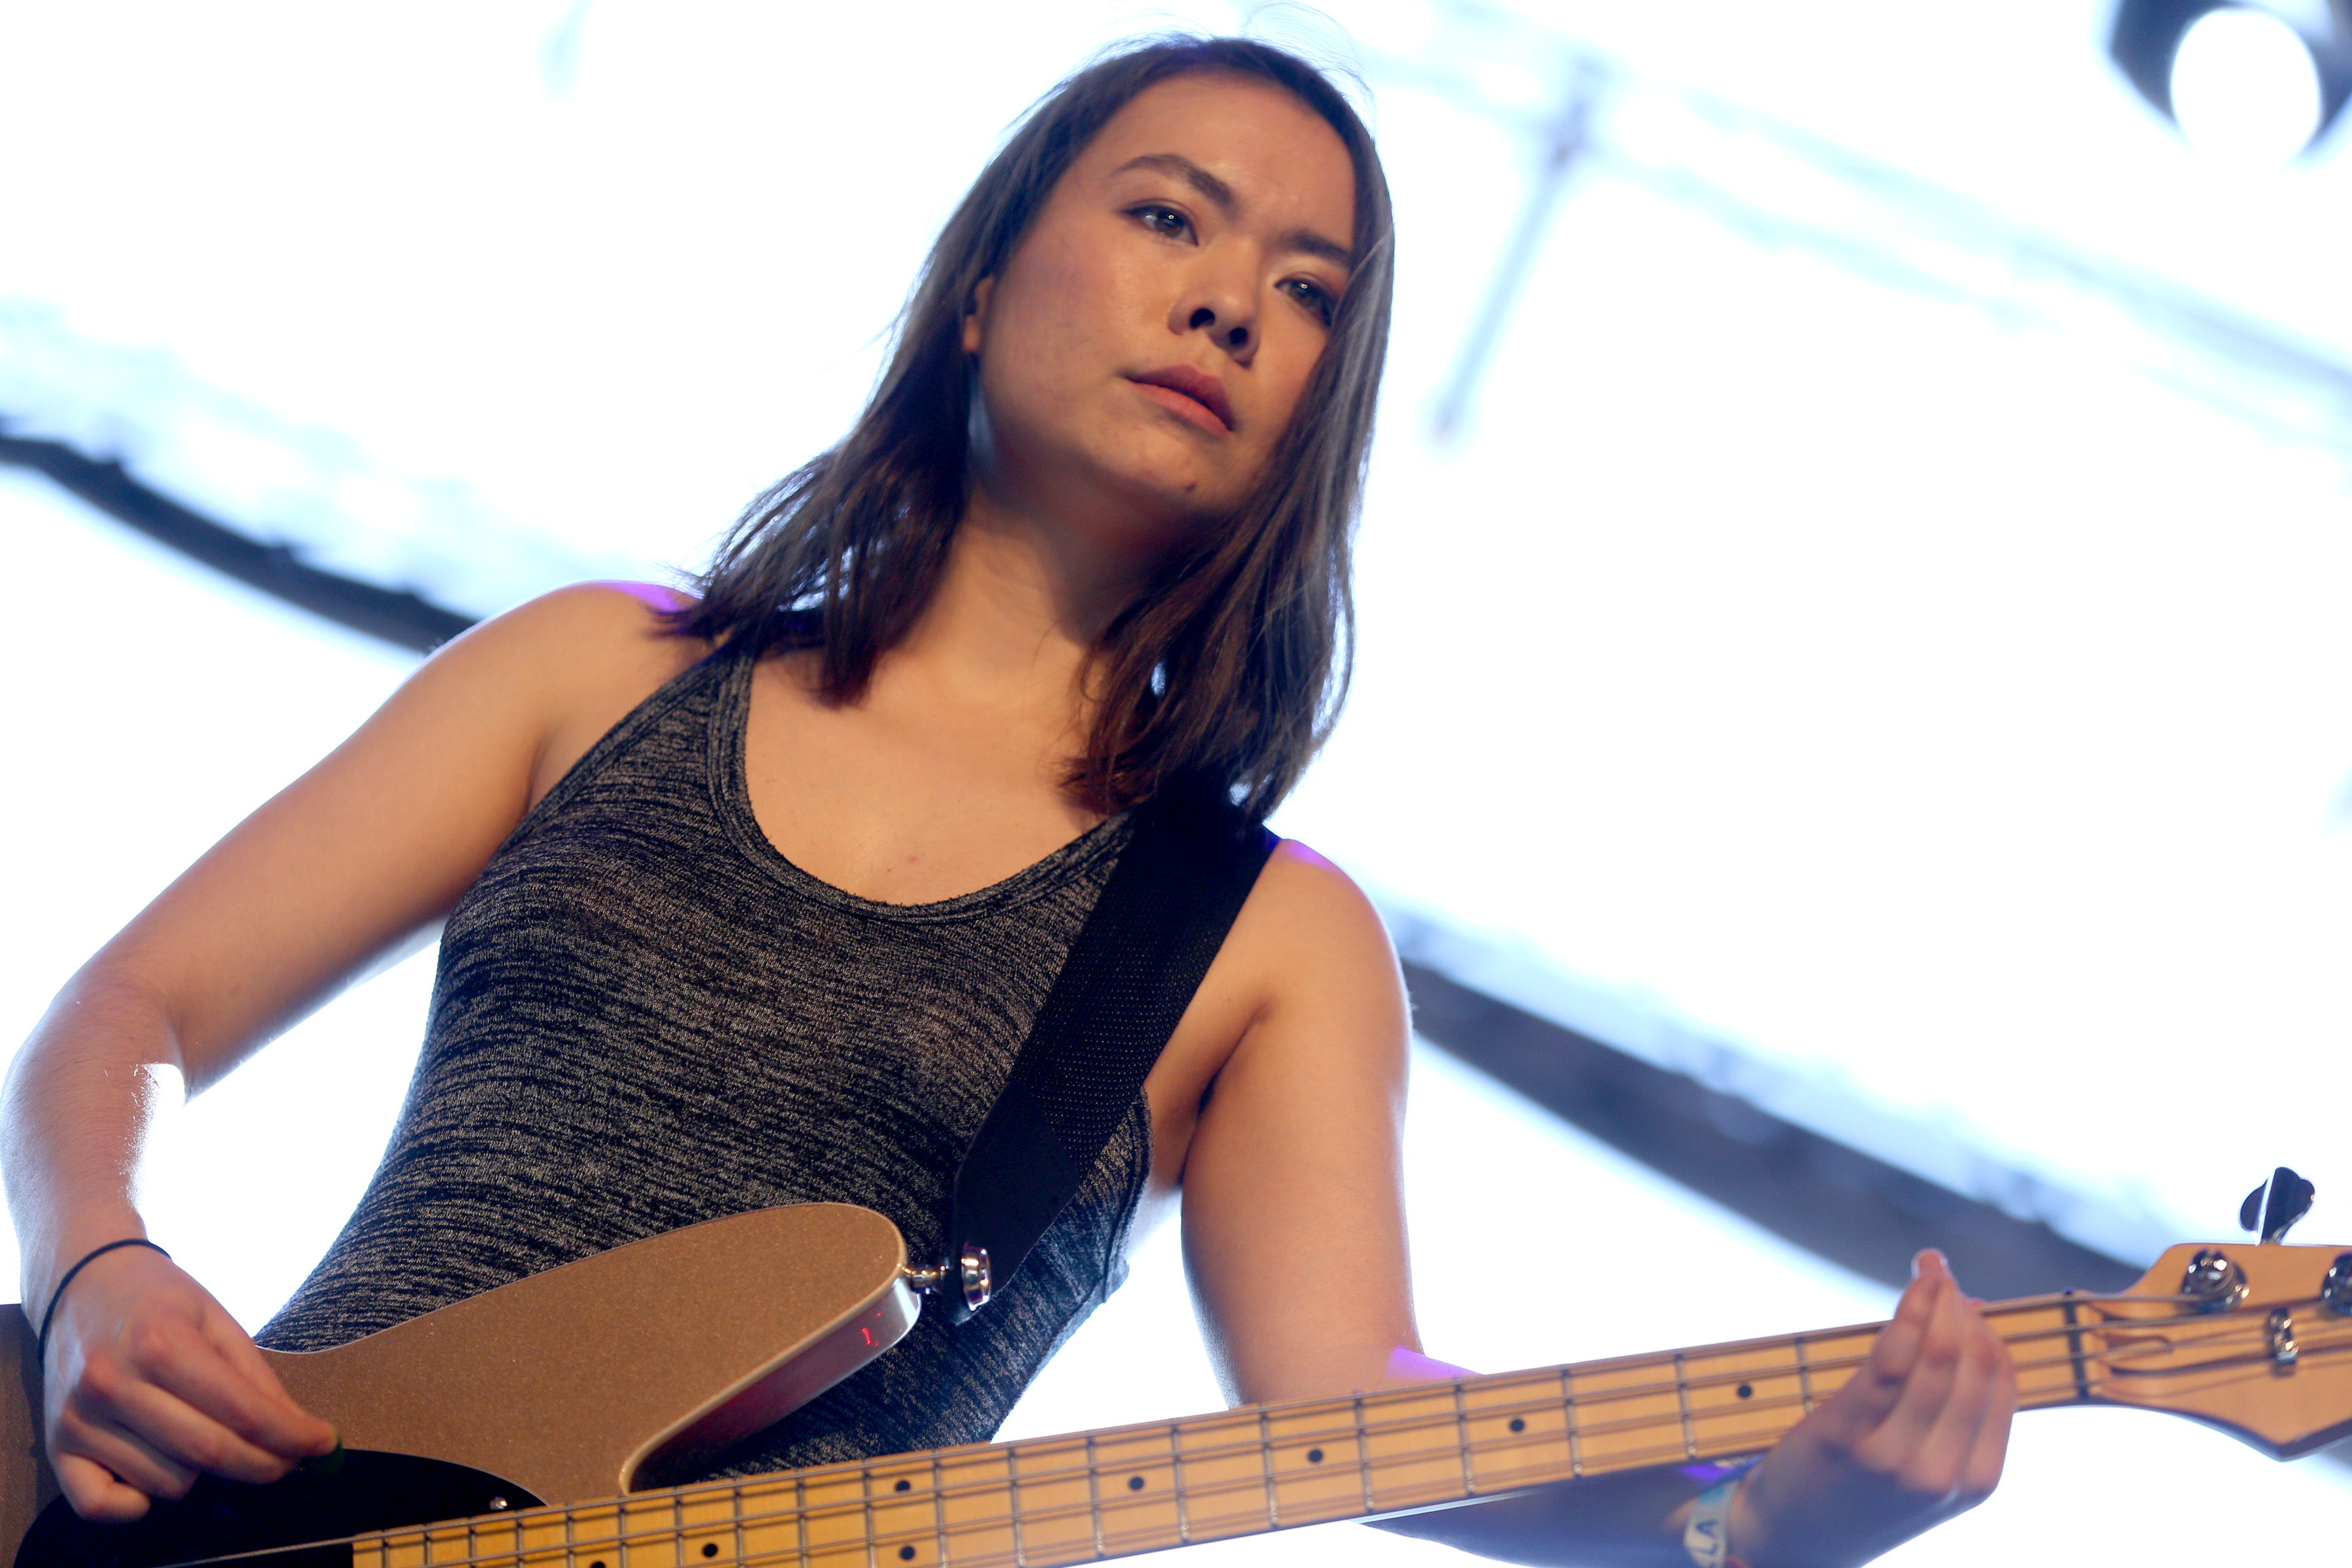 Mitski onstage at the Coachella Valley Music And Arts Festival in 2017, in Indio, California. | Source: Getty Images